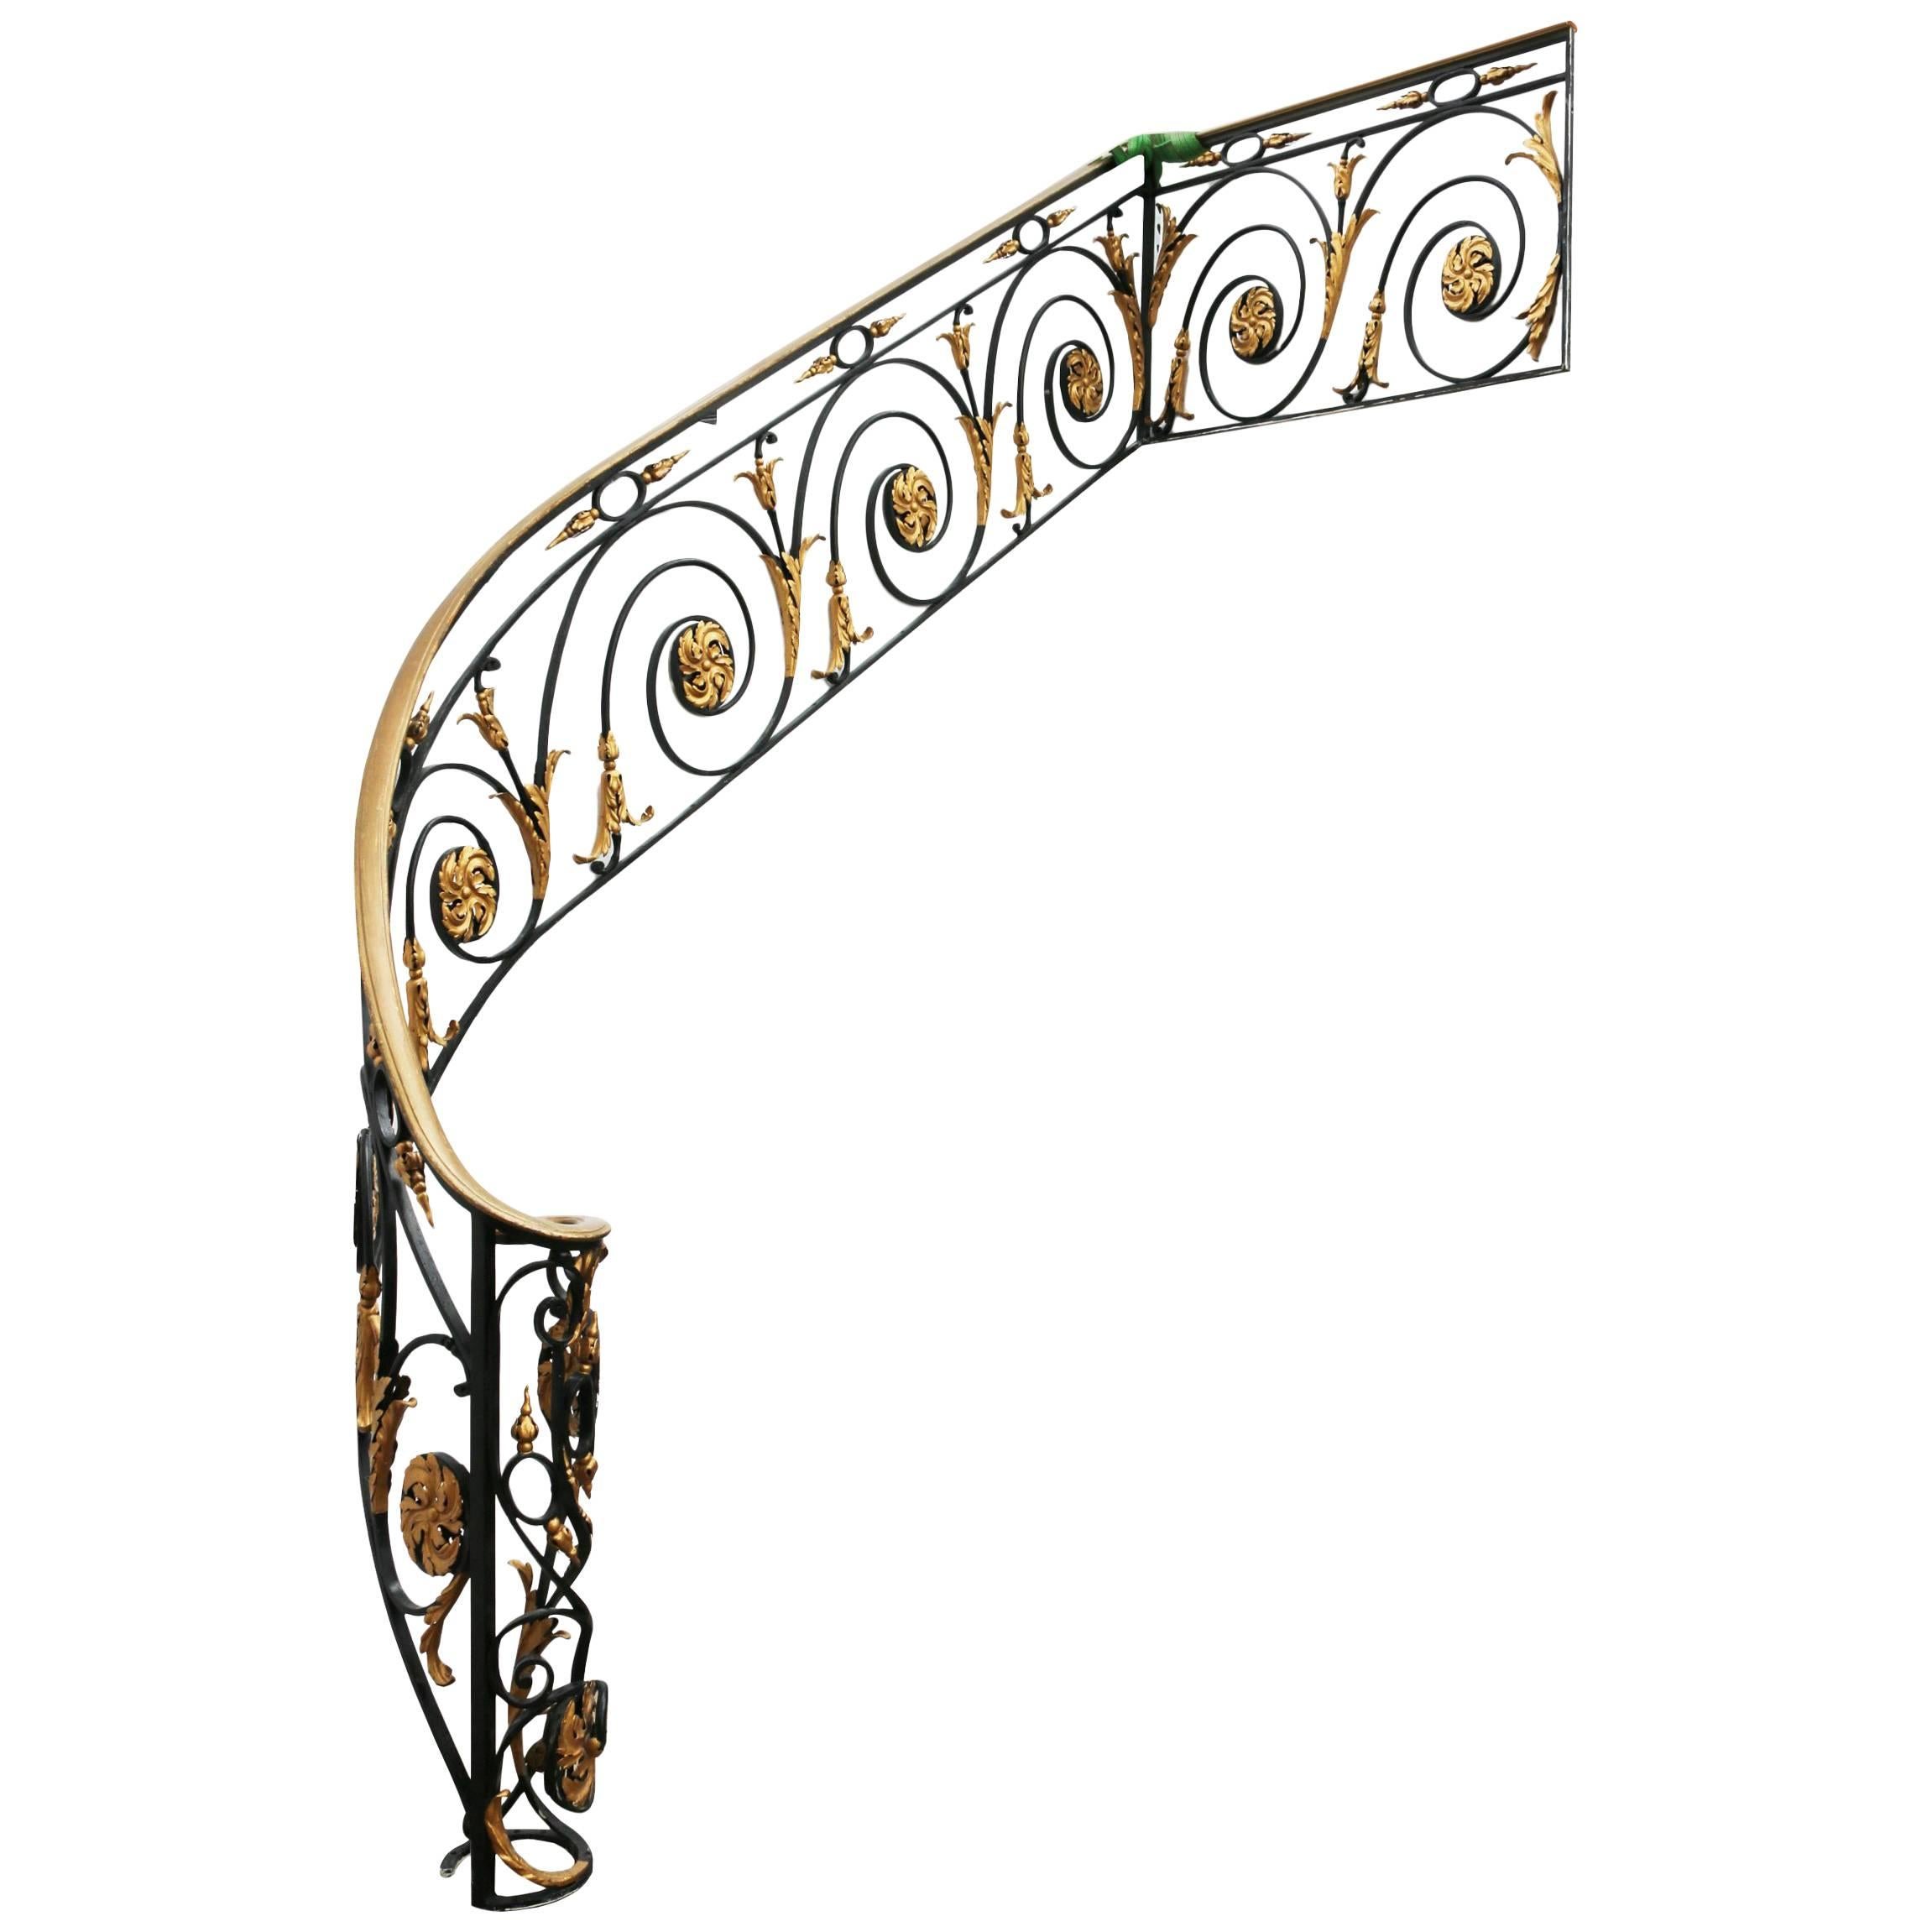 Early 20th Century Wrought Iron Hand-Forged Staircase Balustrade